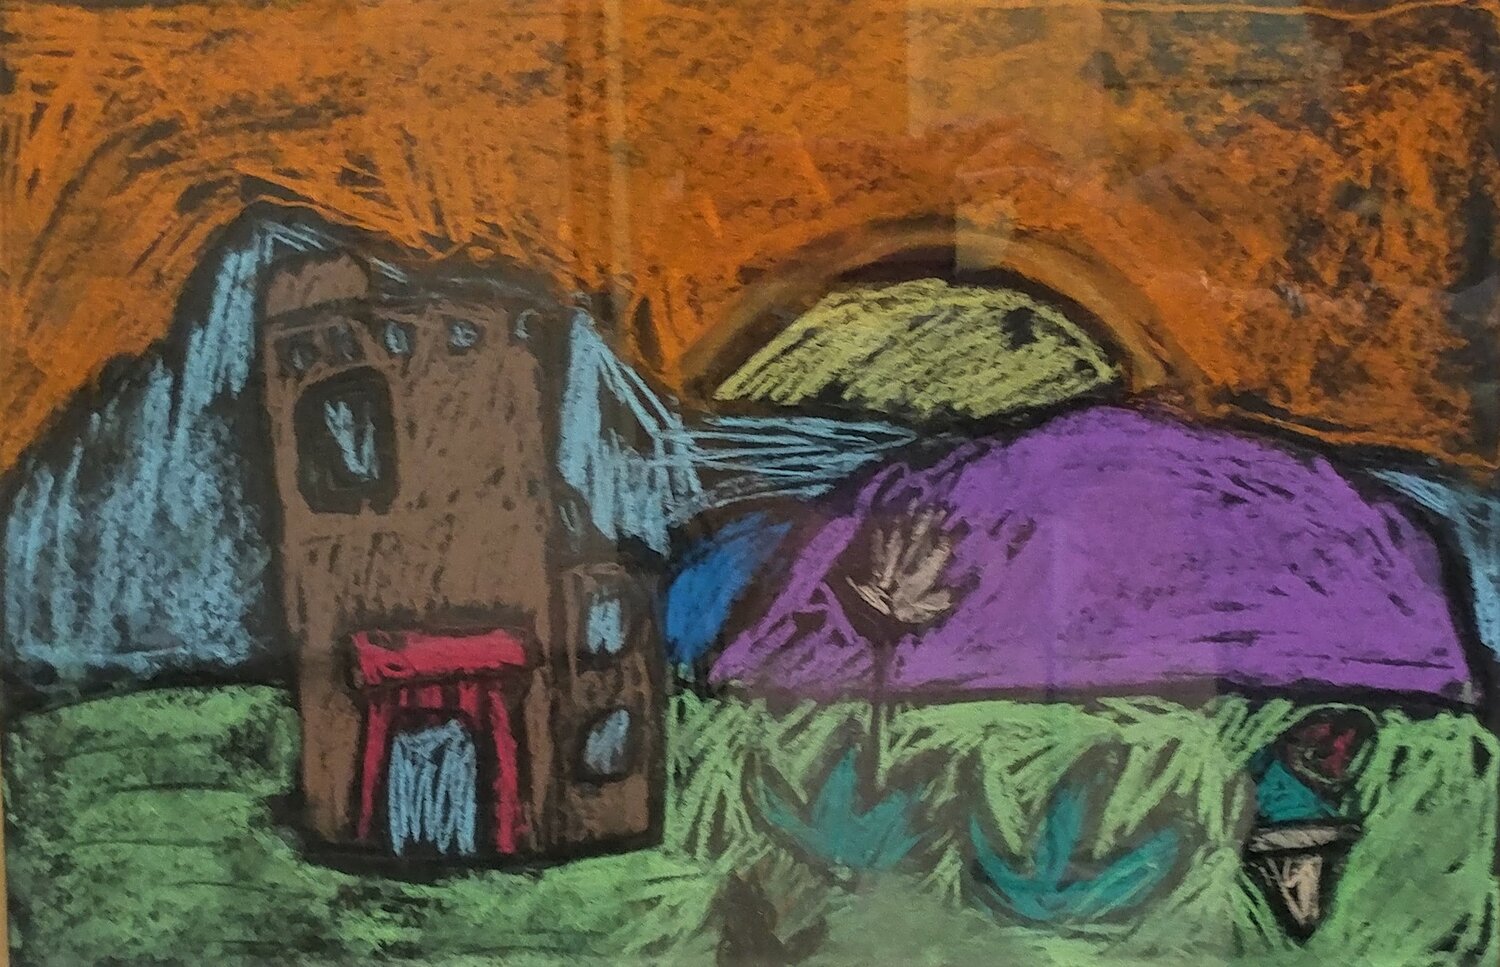 “Purple Mountain,” by Ranyah, a fourth grader at Sonoma Elementary School